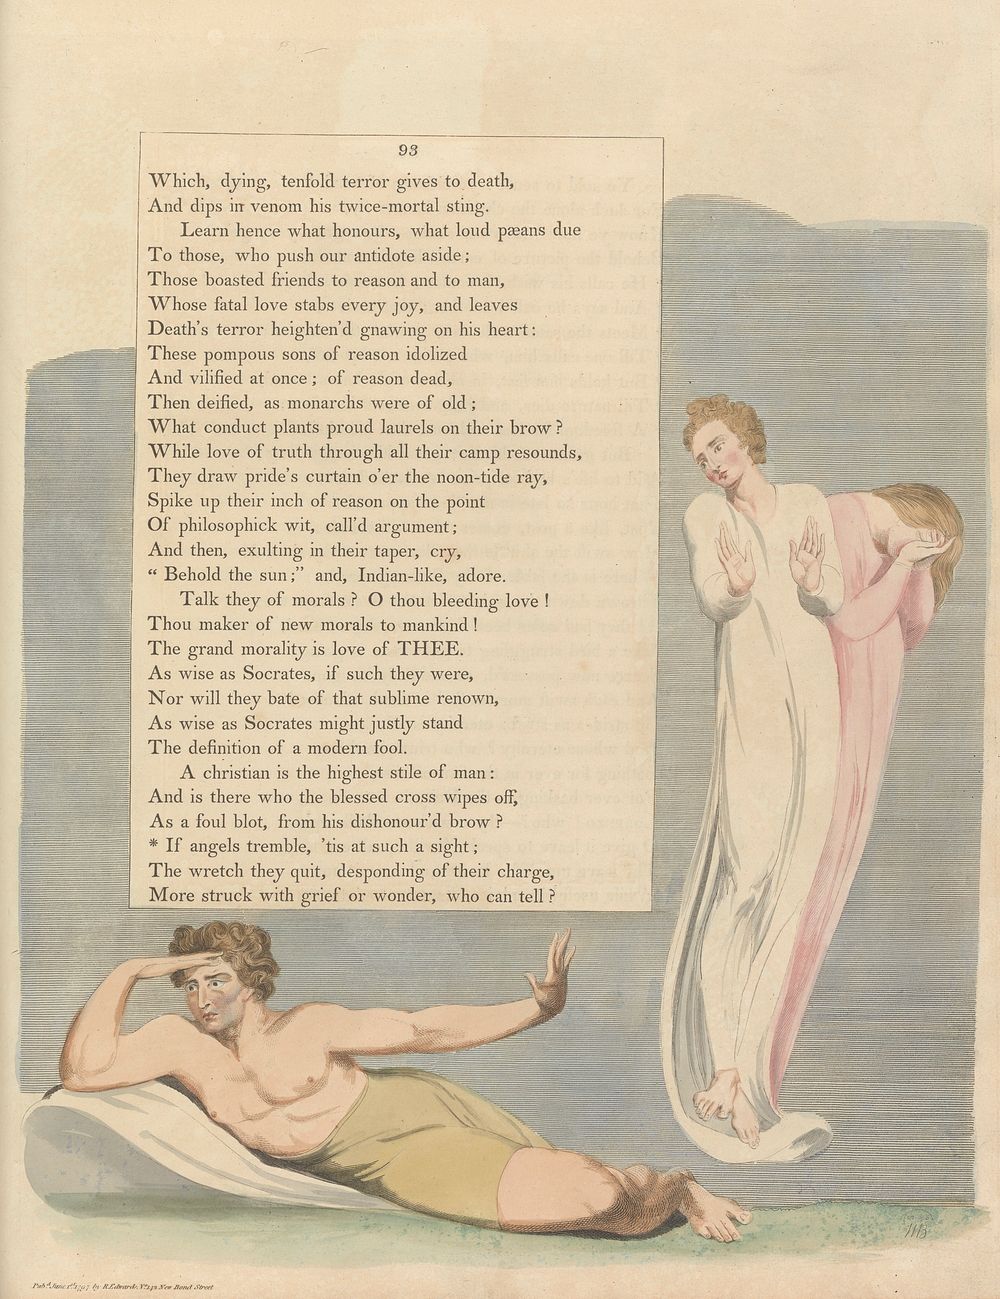 Young's Night Thoughts, Page 93, "If angels tremble, 'tis at such a sight" by William Blake.